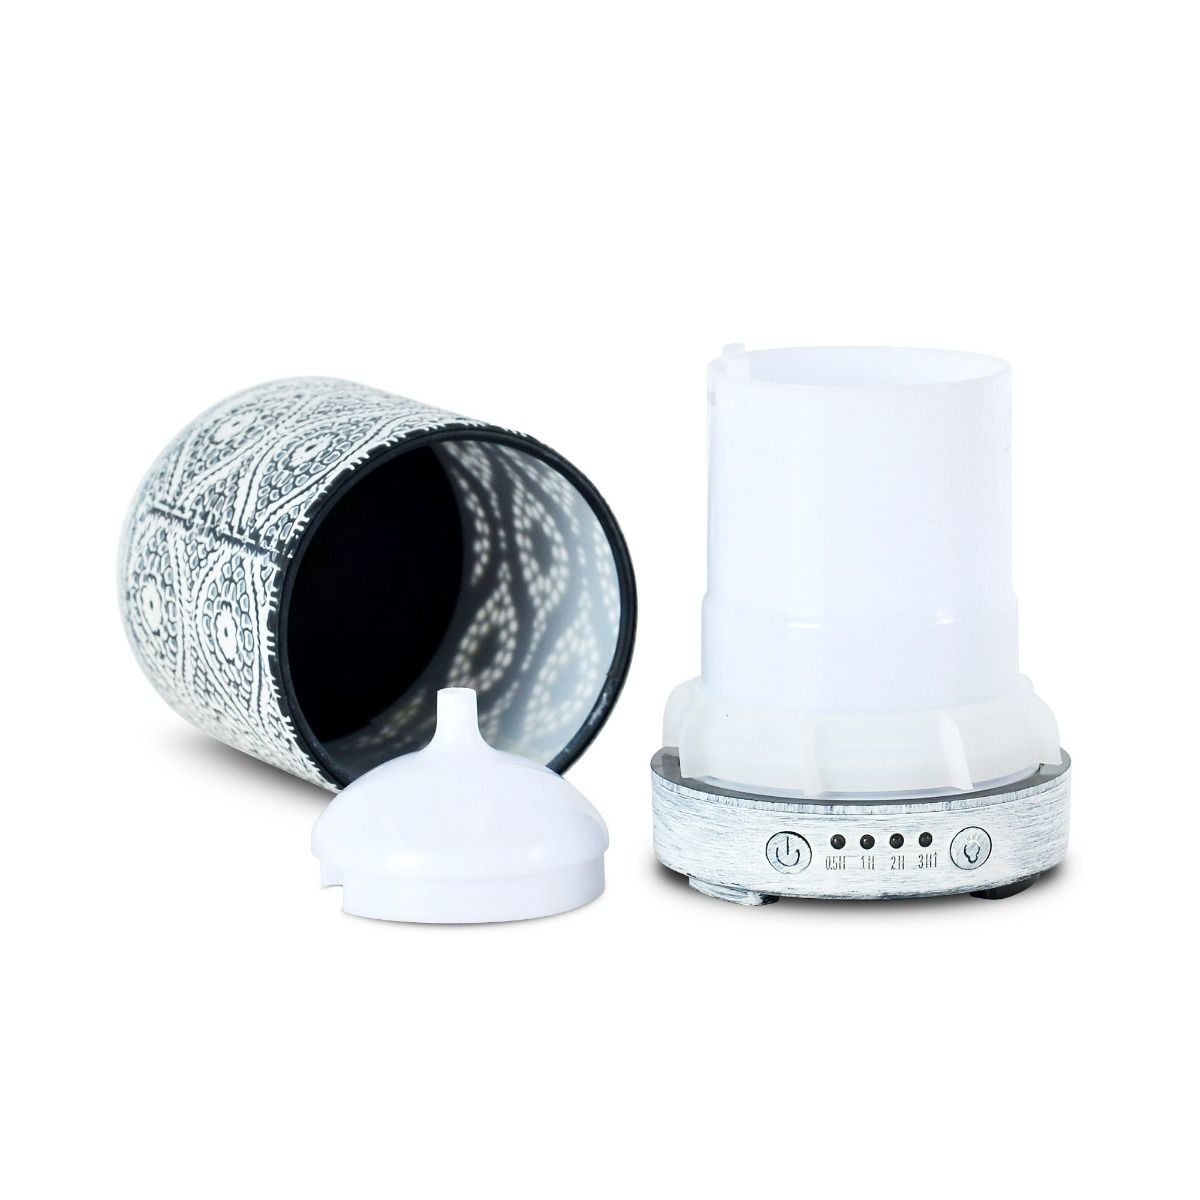 activiva 100ml Metal Essential Oil and Aroma Diffuser-Vintage White - BM House & Garden